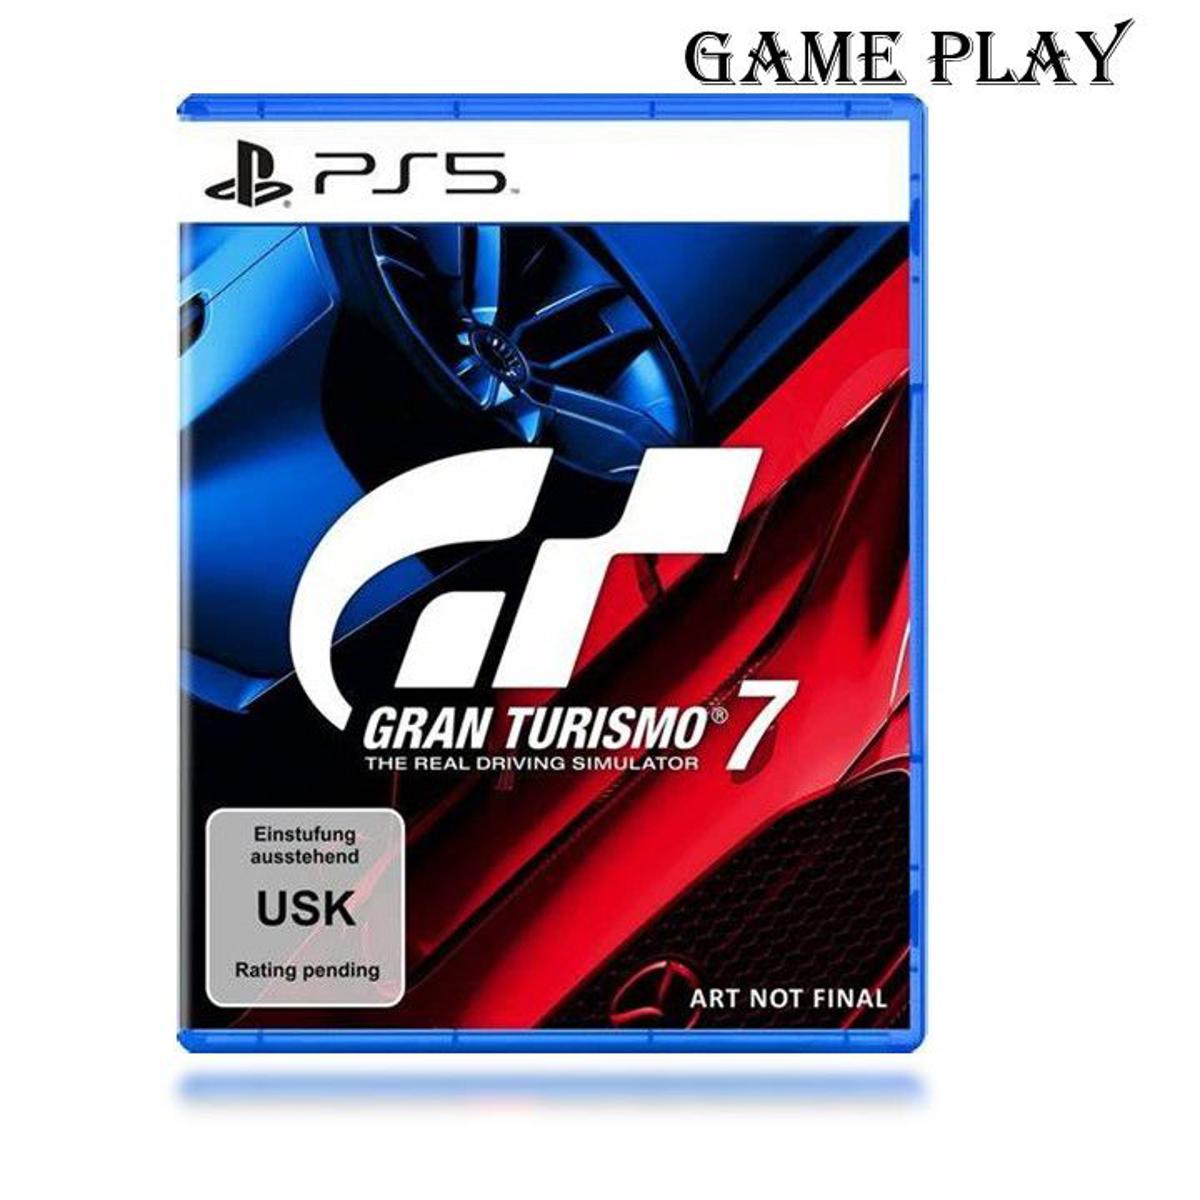 Gran Turismo 7 Ps5 PlayStation 5 Ps5 GT7 - NEW GAME